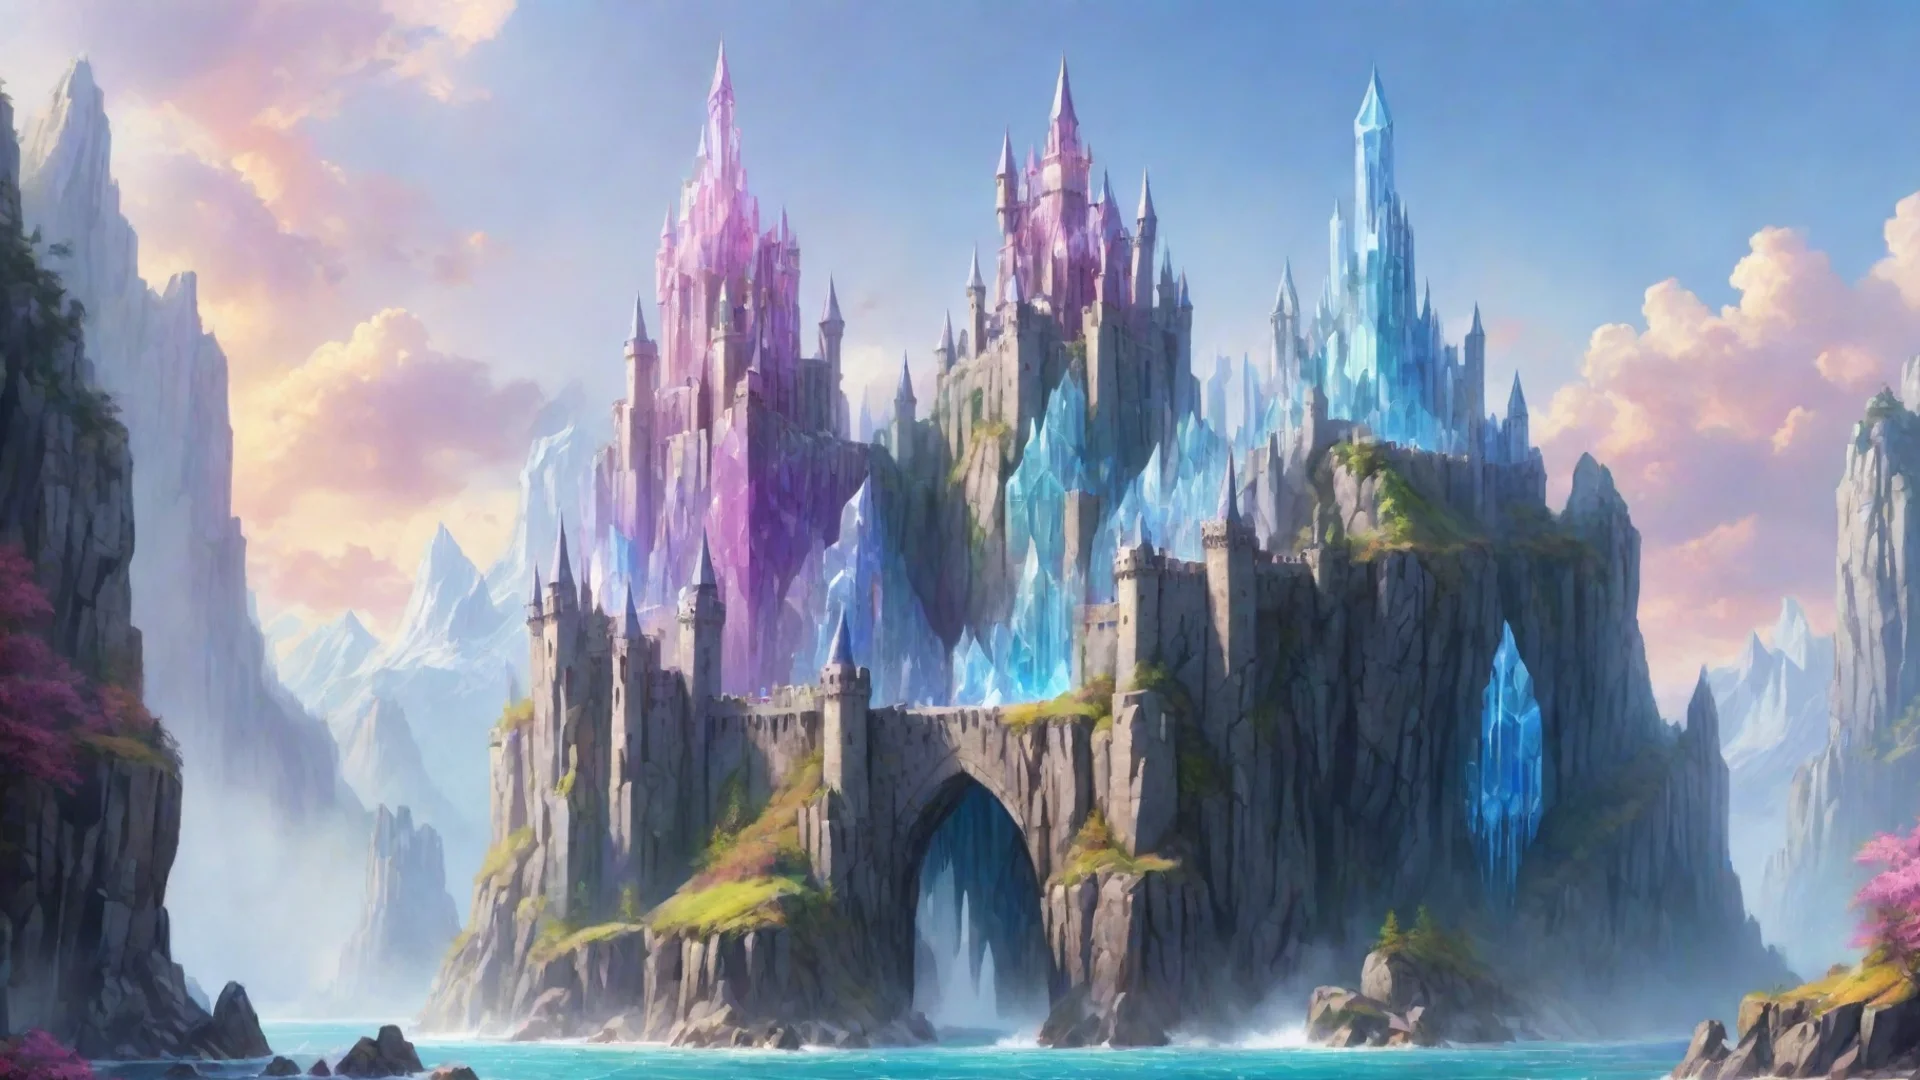 castle fantasy landscape with giant crystal build on giant crystal cliffs bright colors fantasy wide